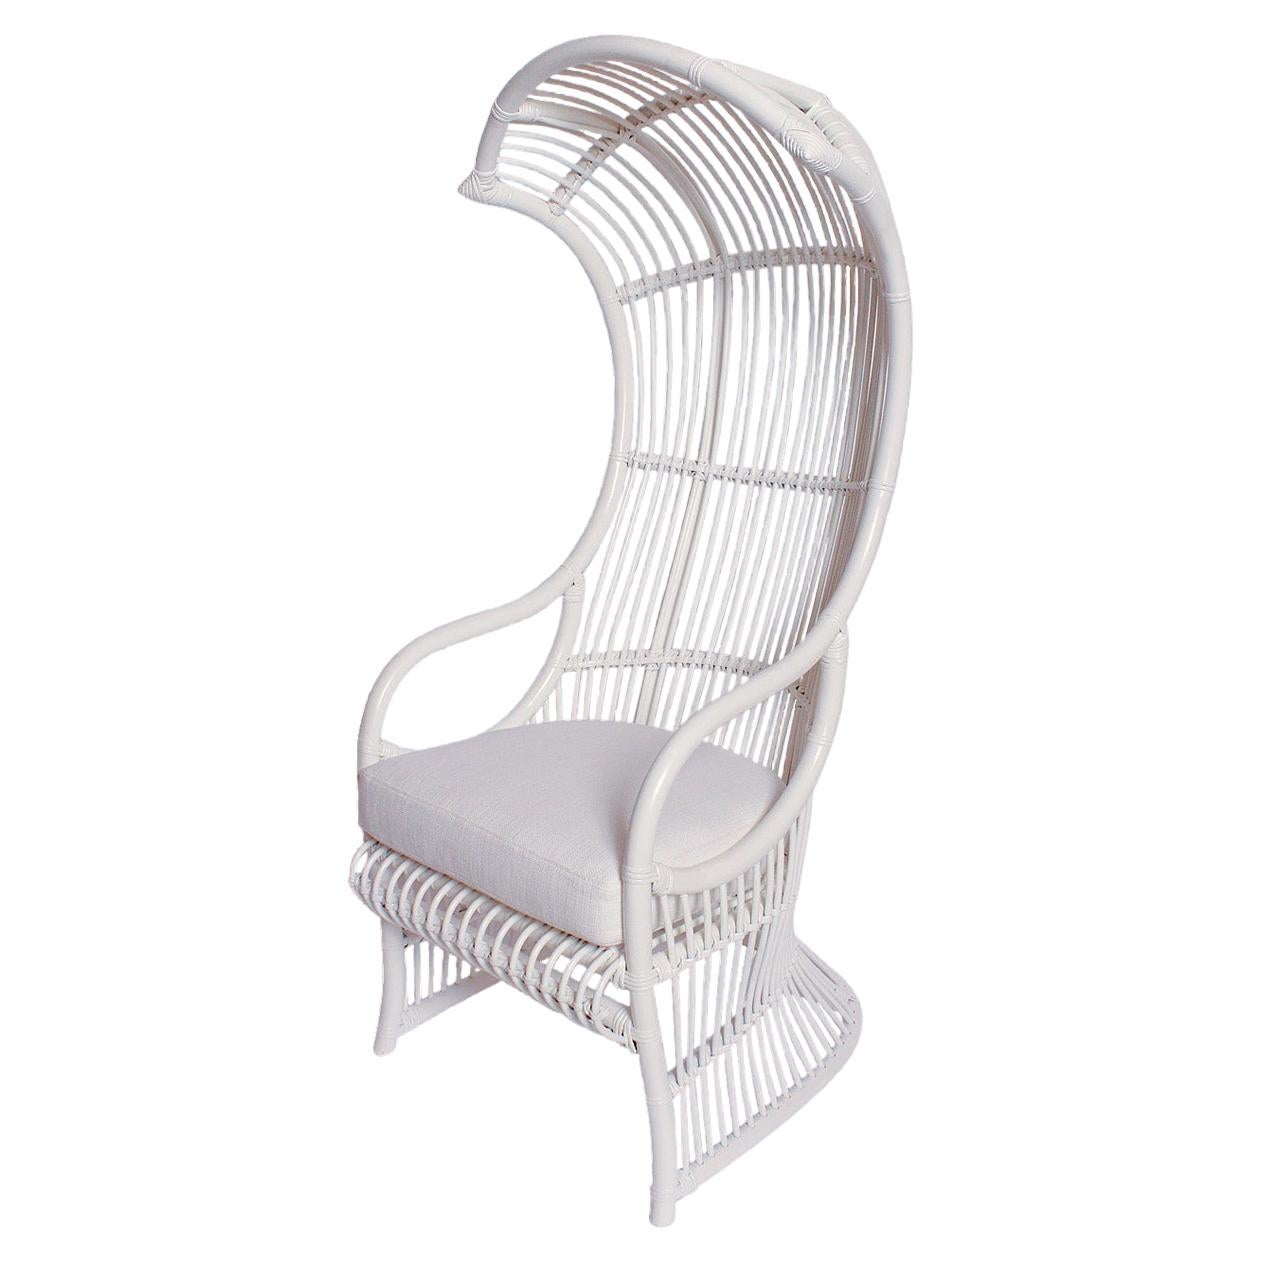 White Bamboo and Rattan Canopy Chair by Henry Olko for Willow and Reed